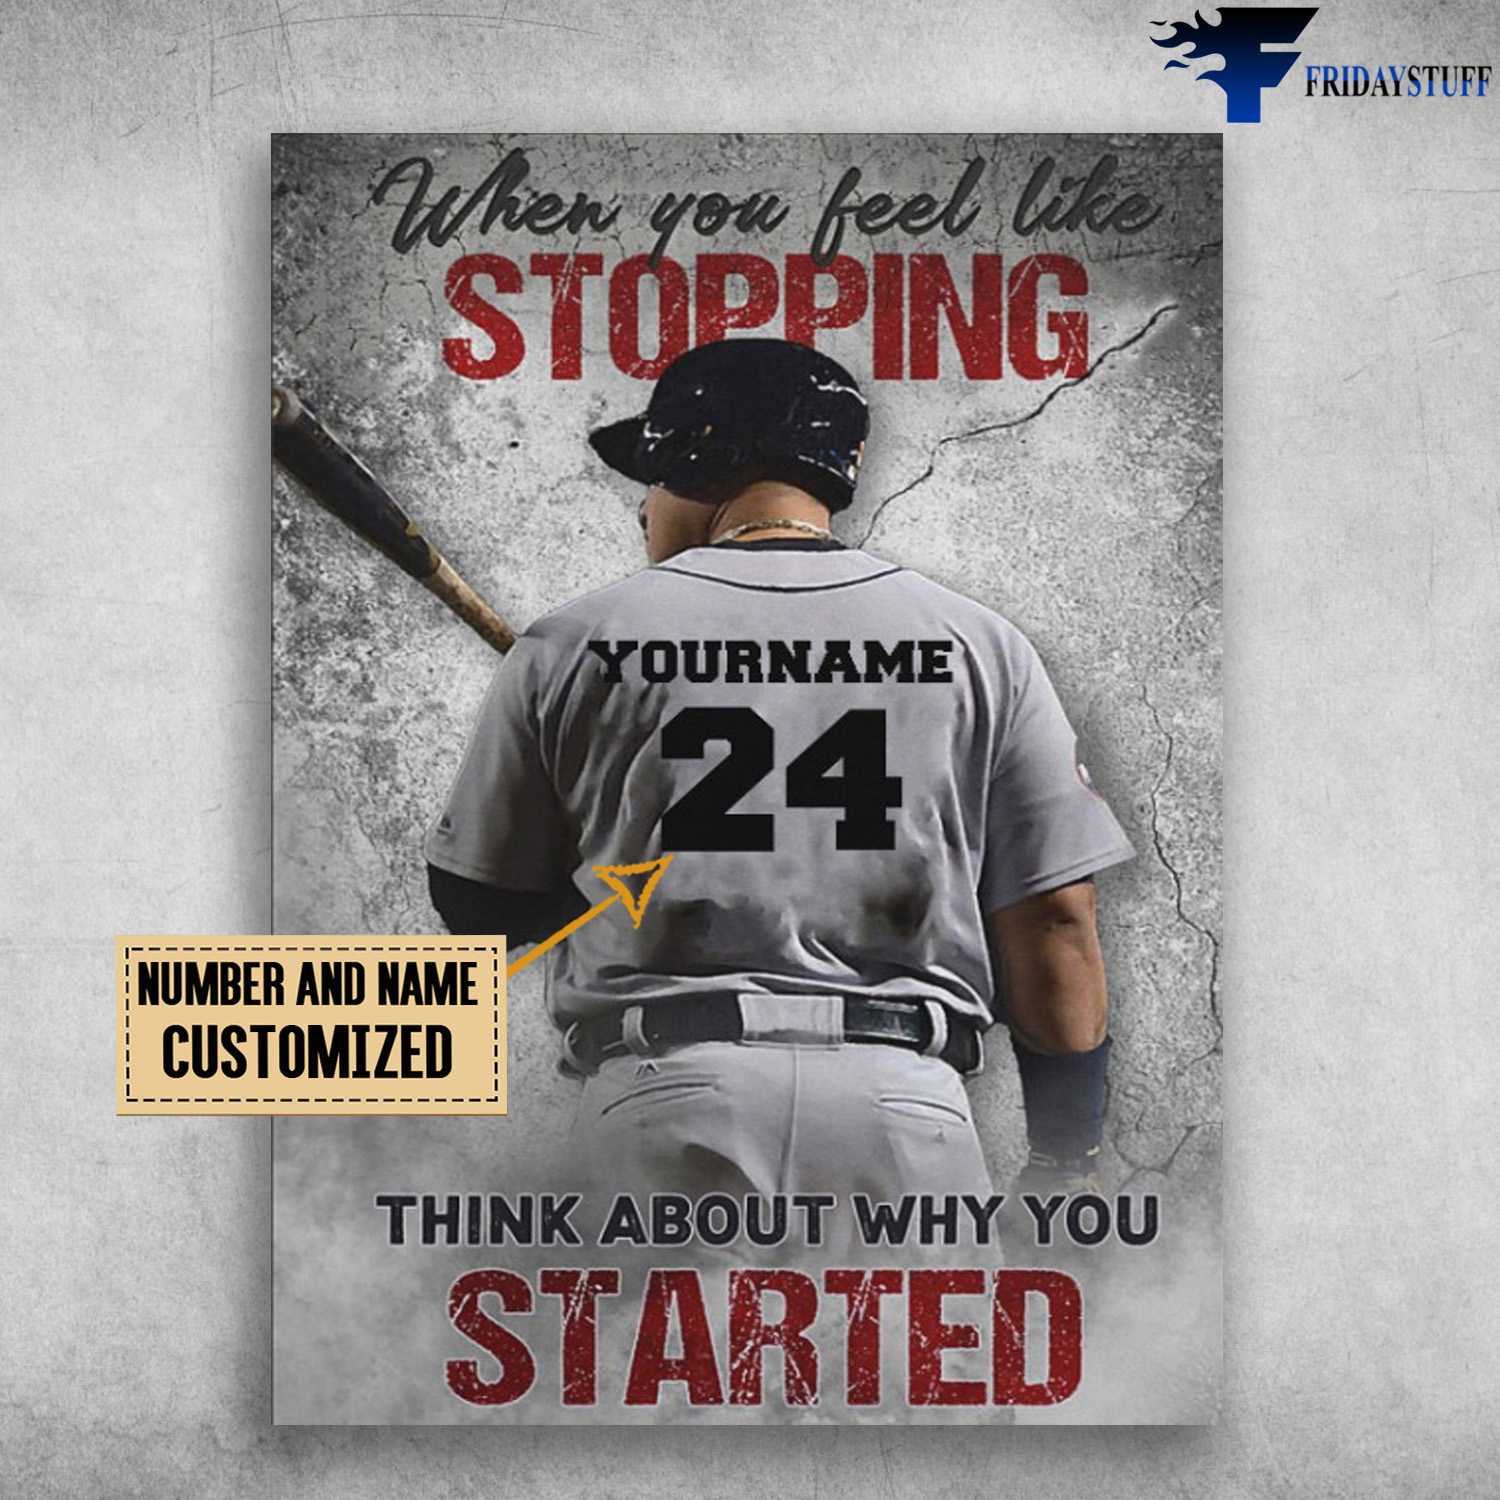 Baseball Player, Baseball Poster, When You Feel Like Stopping, Think About Why You Started